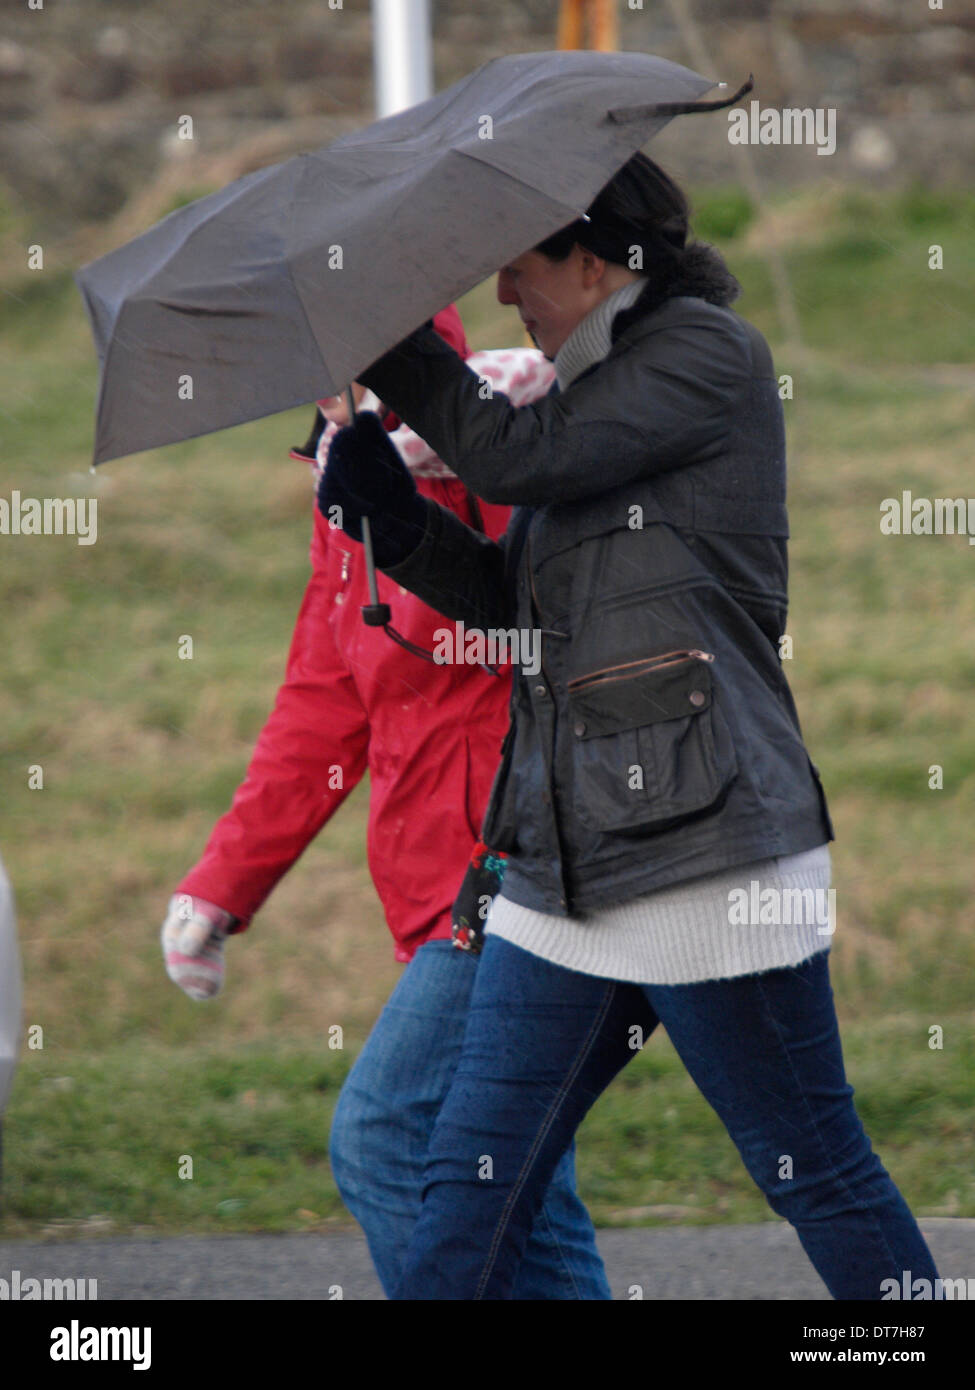 Woman struggling with an umbrella in windy conditions. Stock Photo